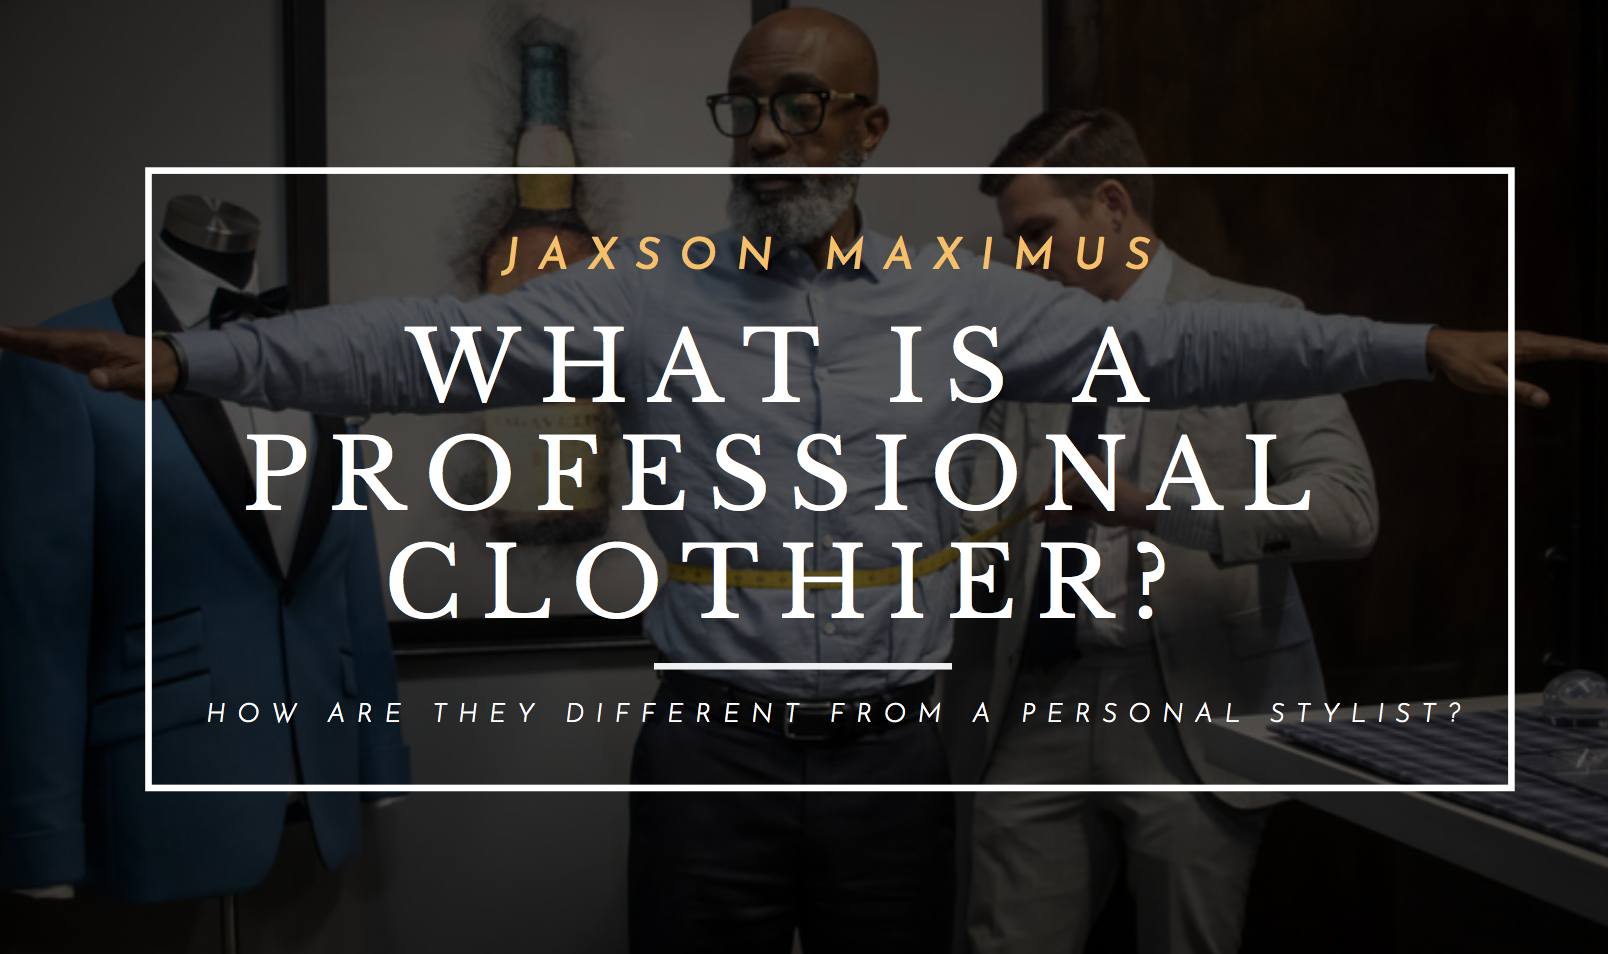 WHAT IS A PROFESSIONAL CLOTHIER? HOW ARE THEY DIFFERENT FROM A PERSONAL STYLIST?